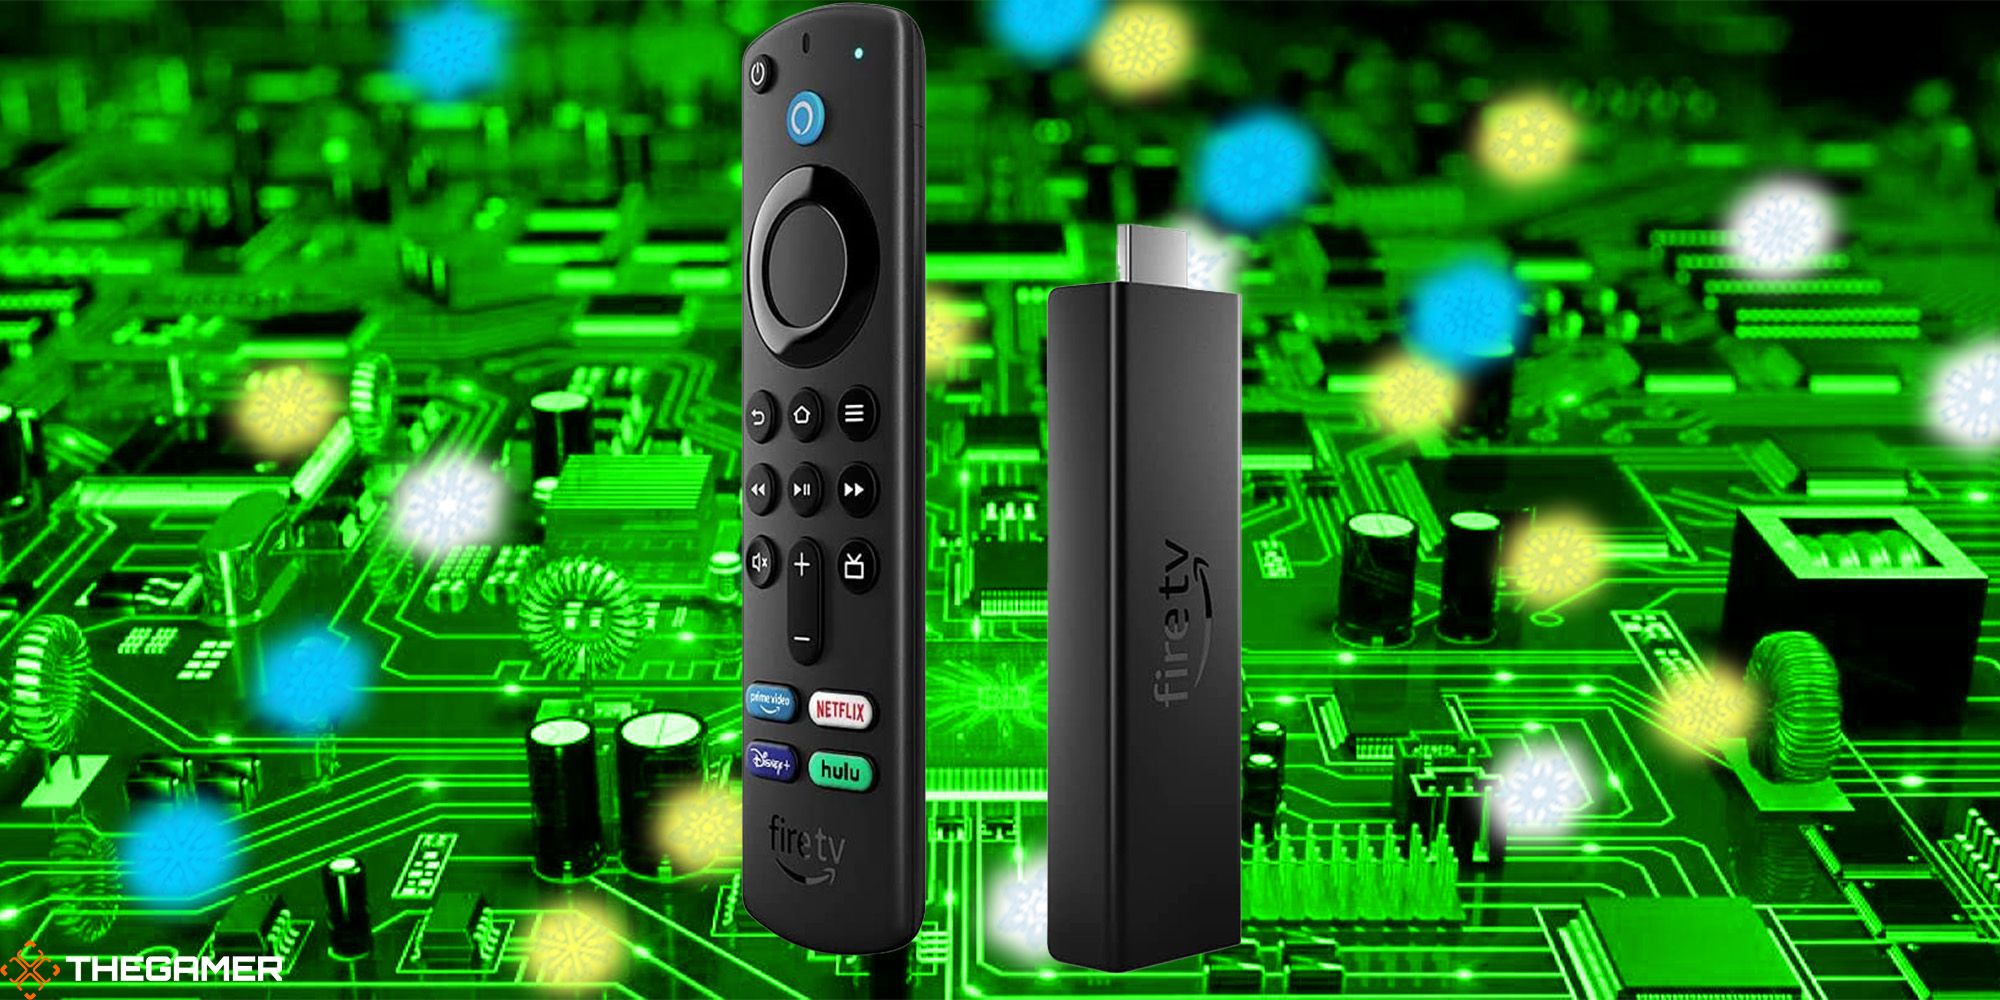 A FireTV 4K Max stick and remote against a snowy, green tech background. Custom image for TG.